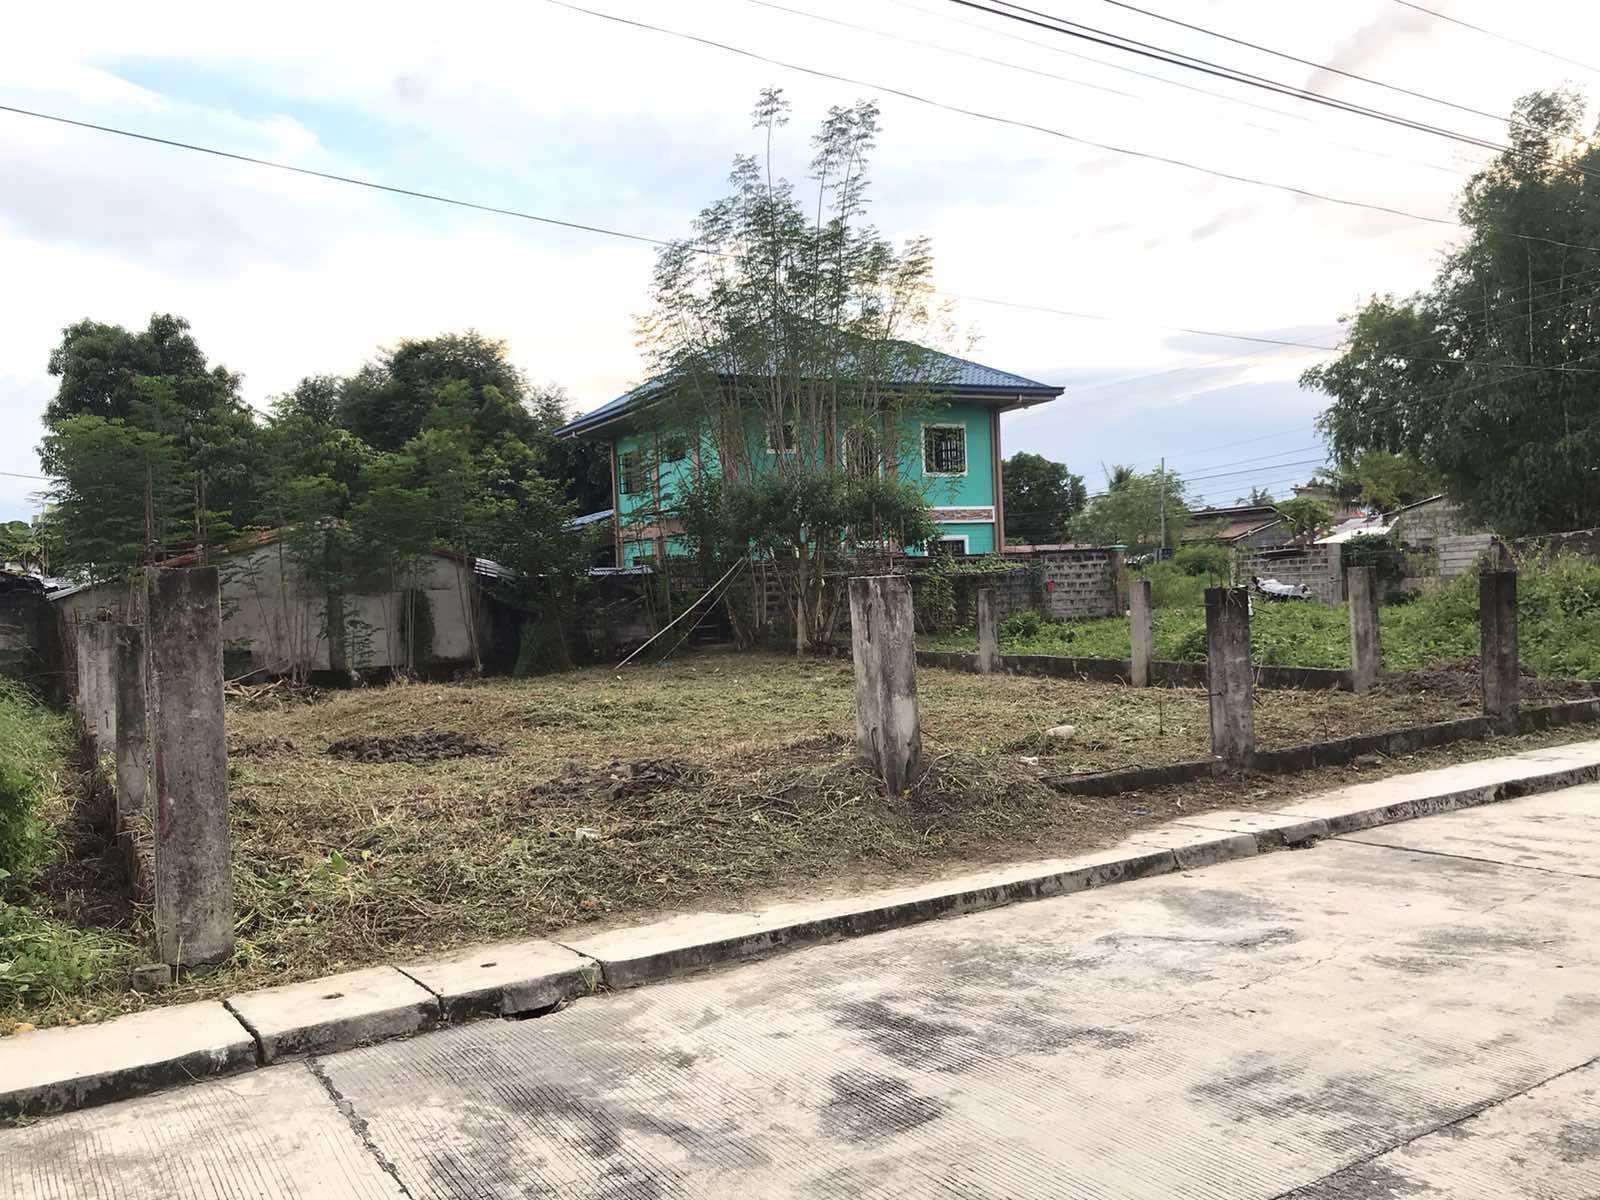 250 sqm Lot for Sale in Jocelyn Village at Paniqui, Tarlac